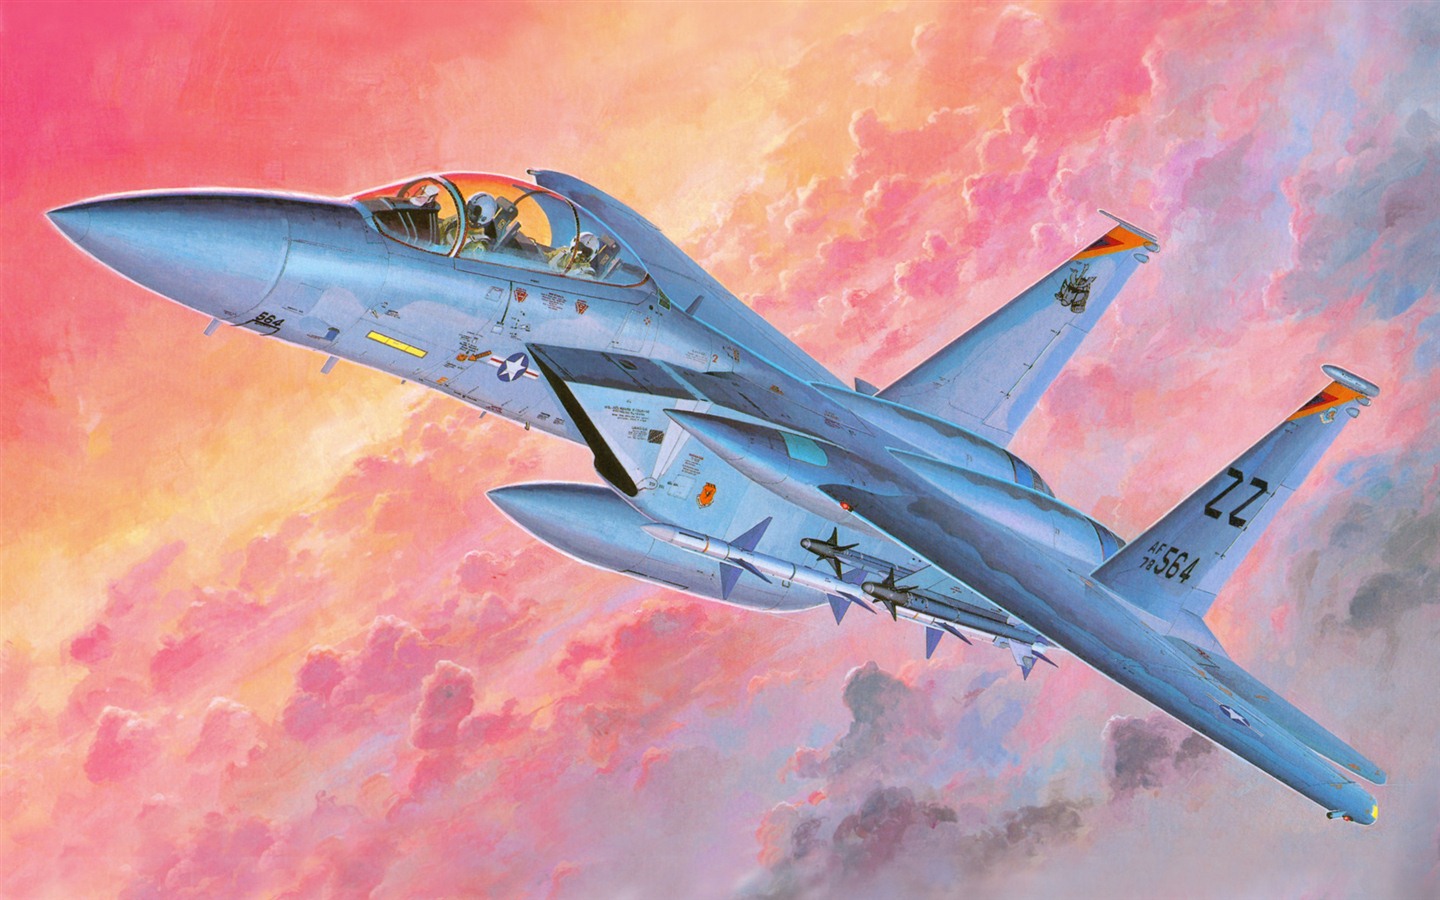 Military aircraft flight exquisite painting wallpapers #15 - 1440x900